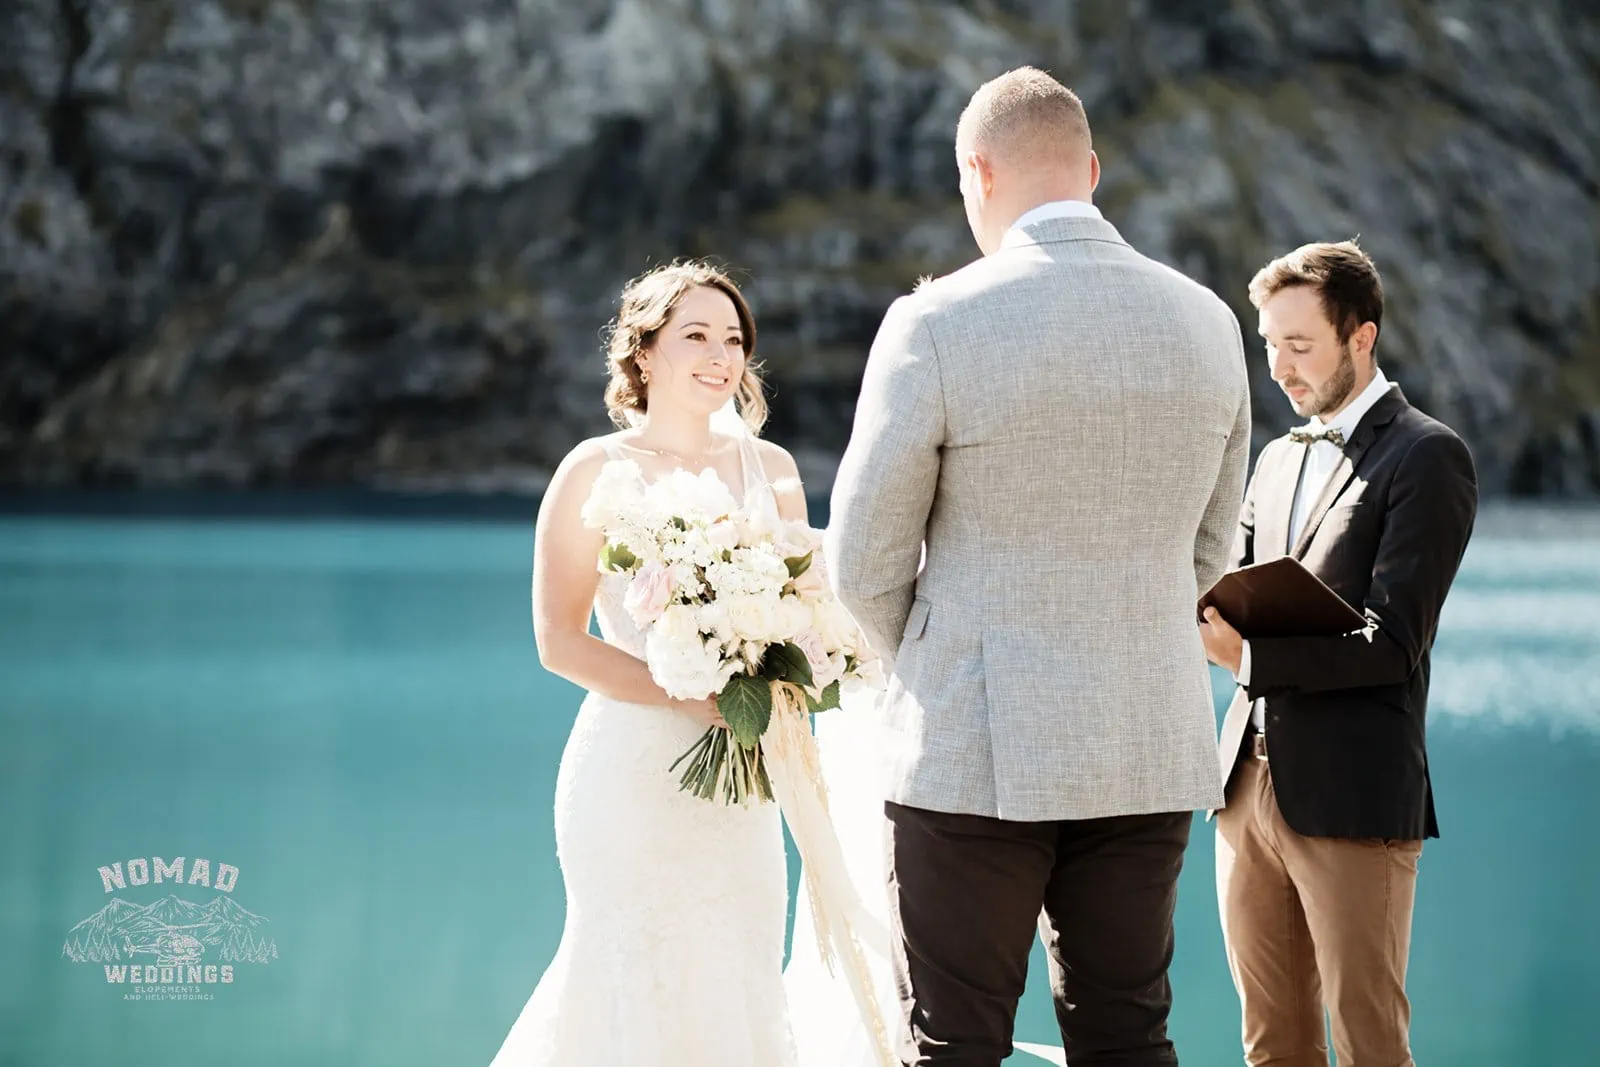 Amy and Eden have an enchanting lakefront wedding ceremony.